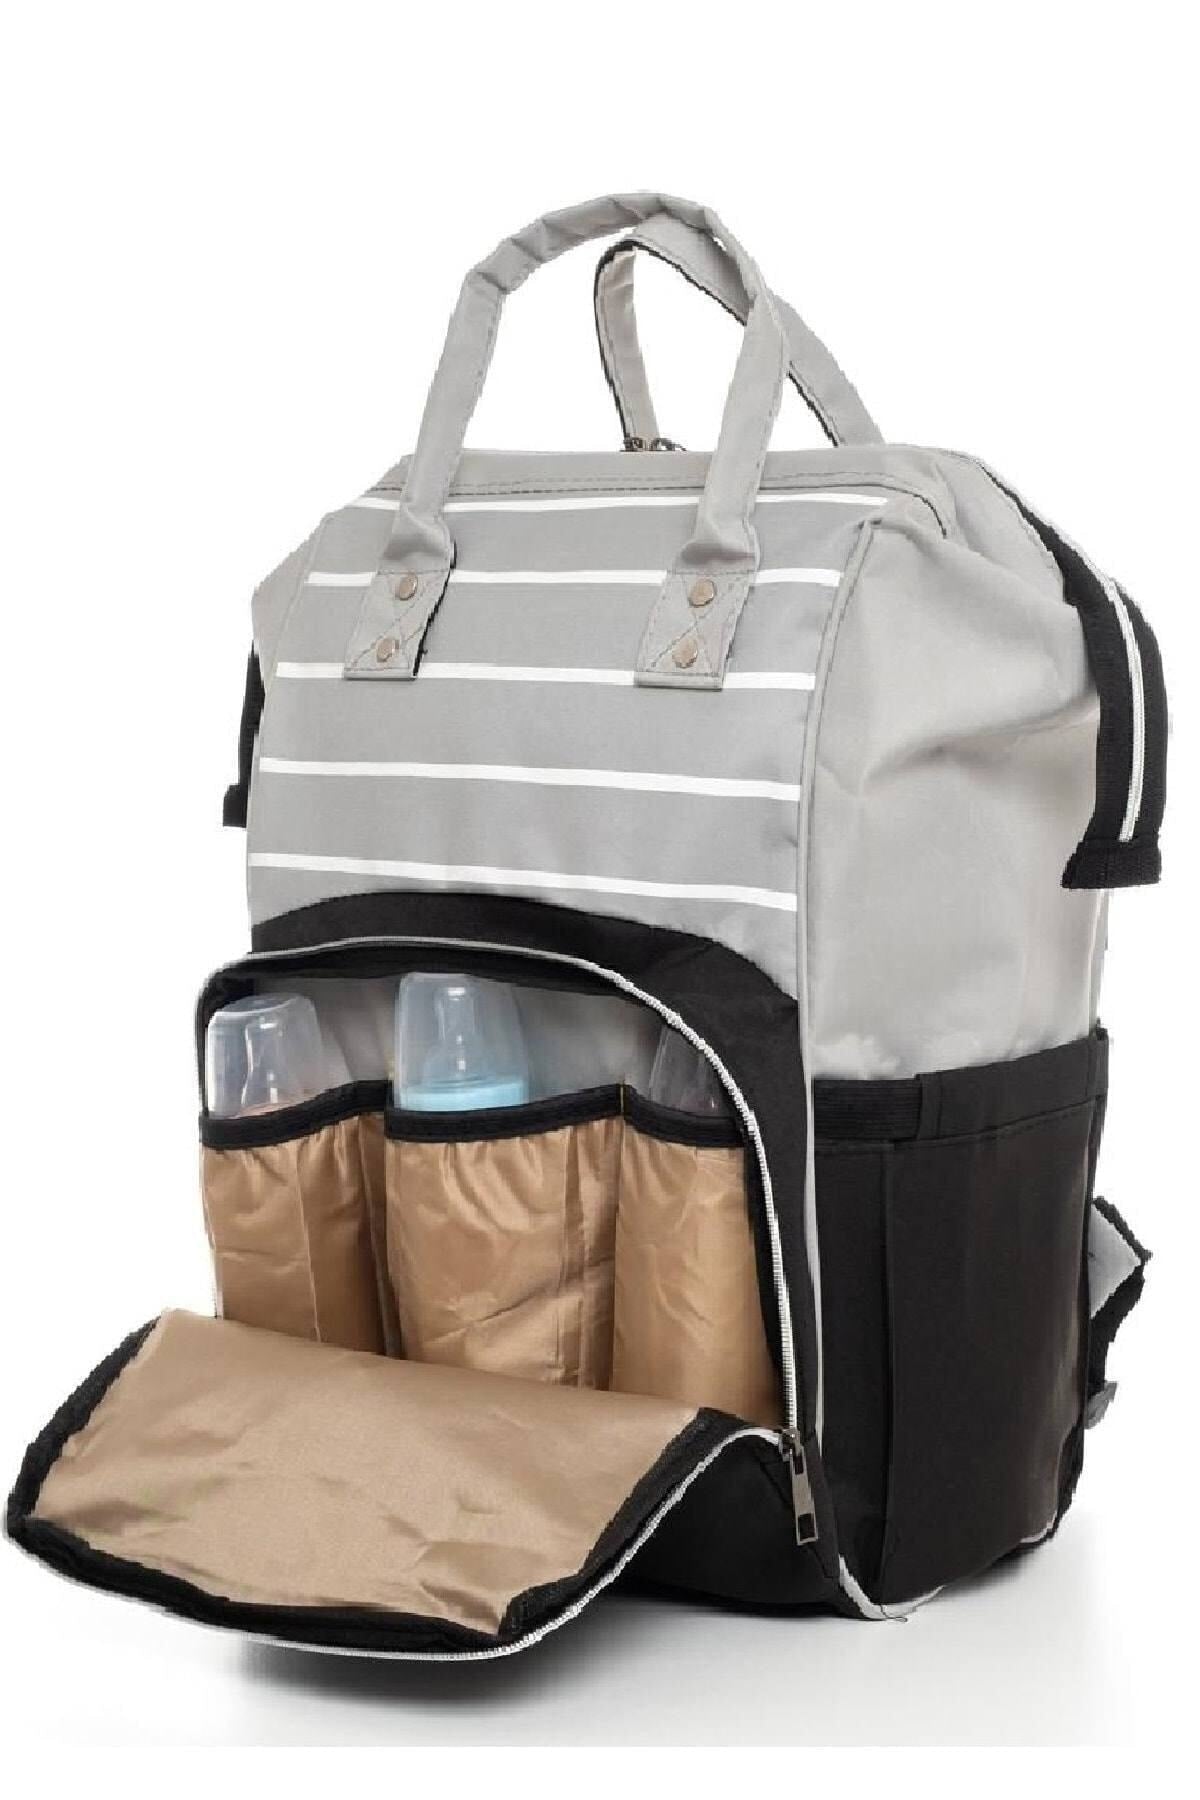 Black Smoked Striped Mother Baby Care Backpack With Baby Bottle Thermos Liquid Proof Stroller With Hanger Apparatus